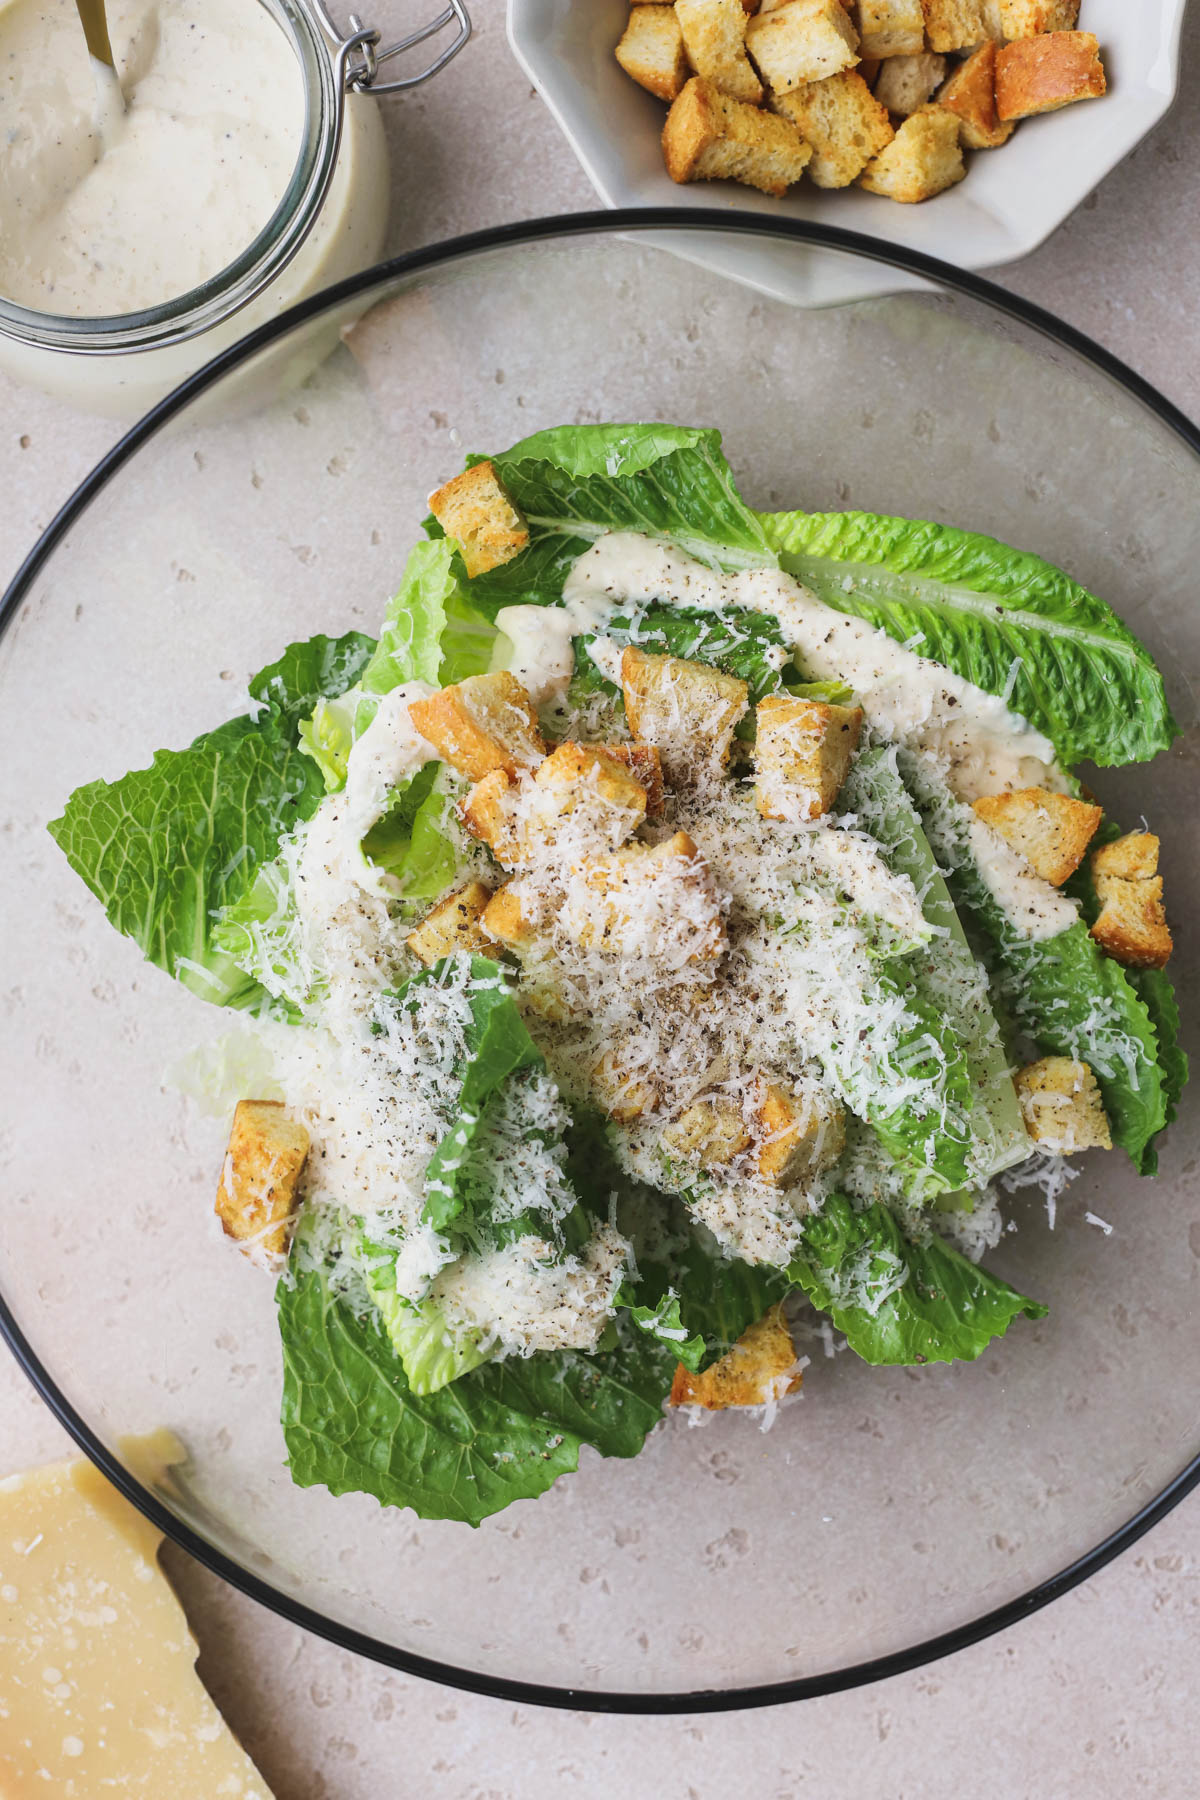 Caesar salad dressing without anchovies, romaine lettuce, croutons and parmesan cheese. 